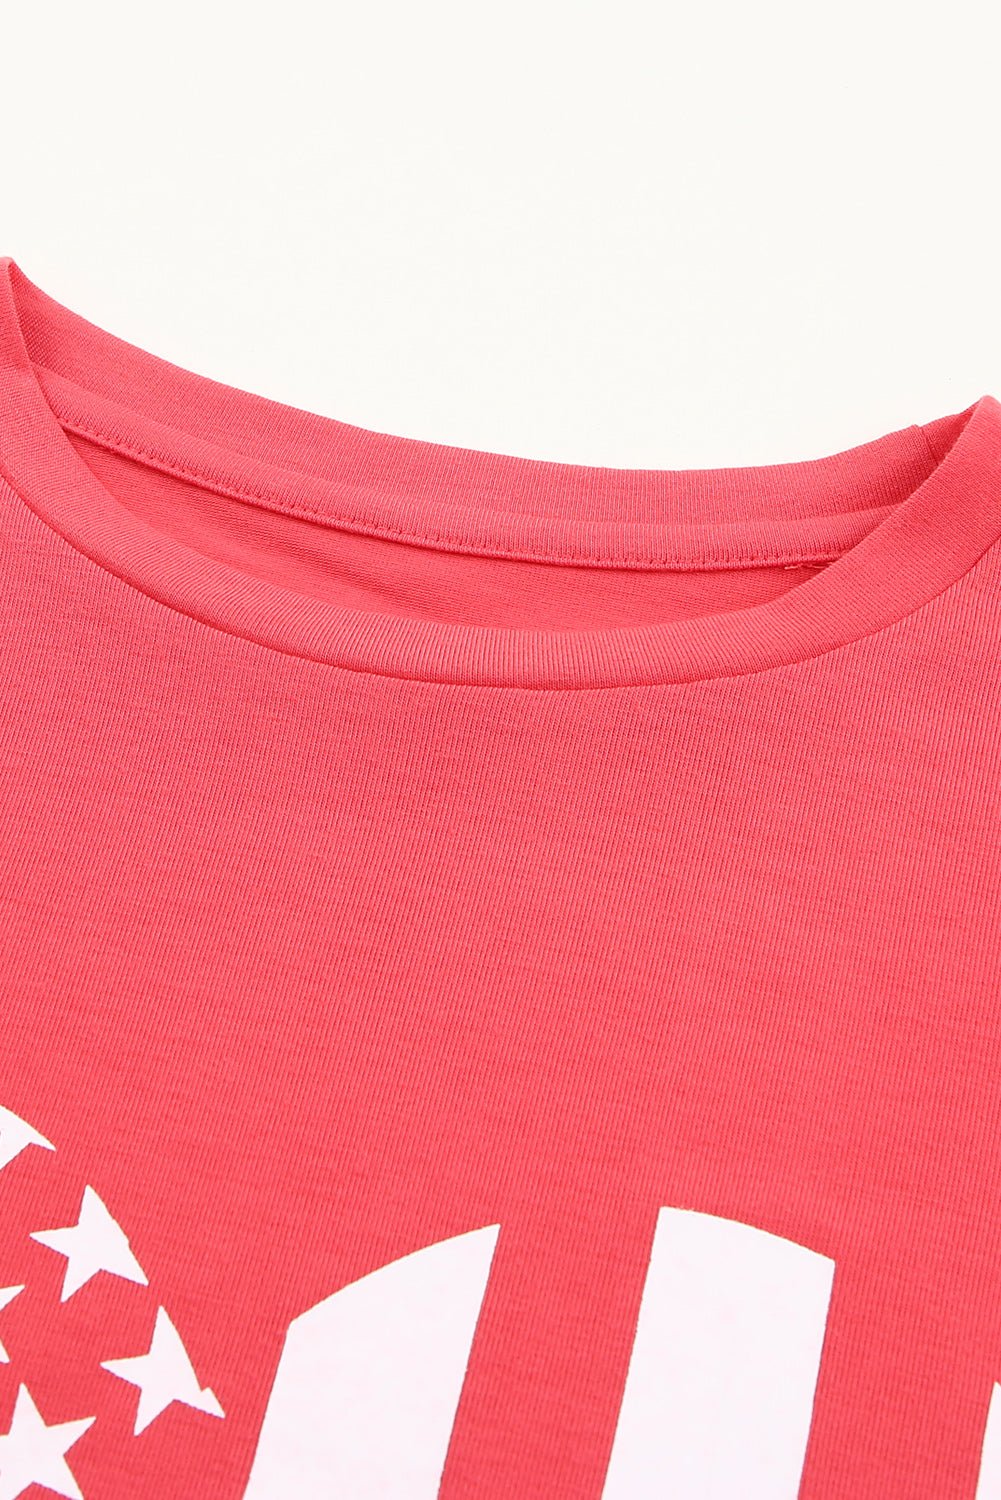 Stars and Stripes Graphic Tee Shirt - OMG! Rose